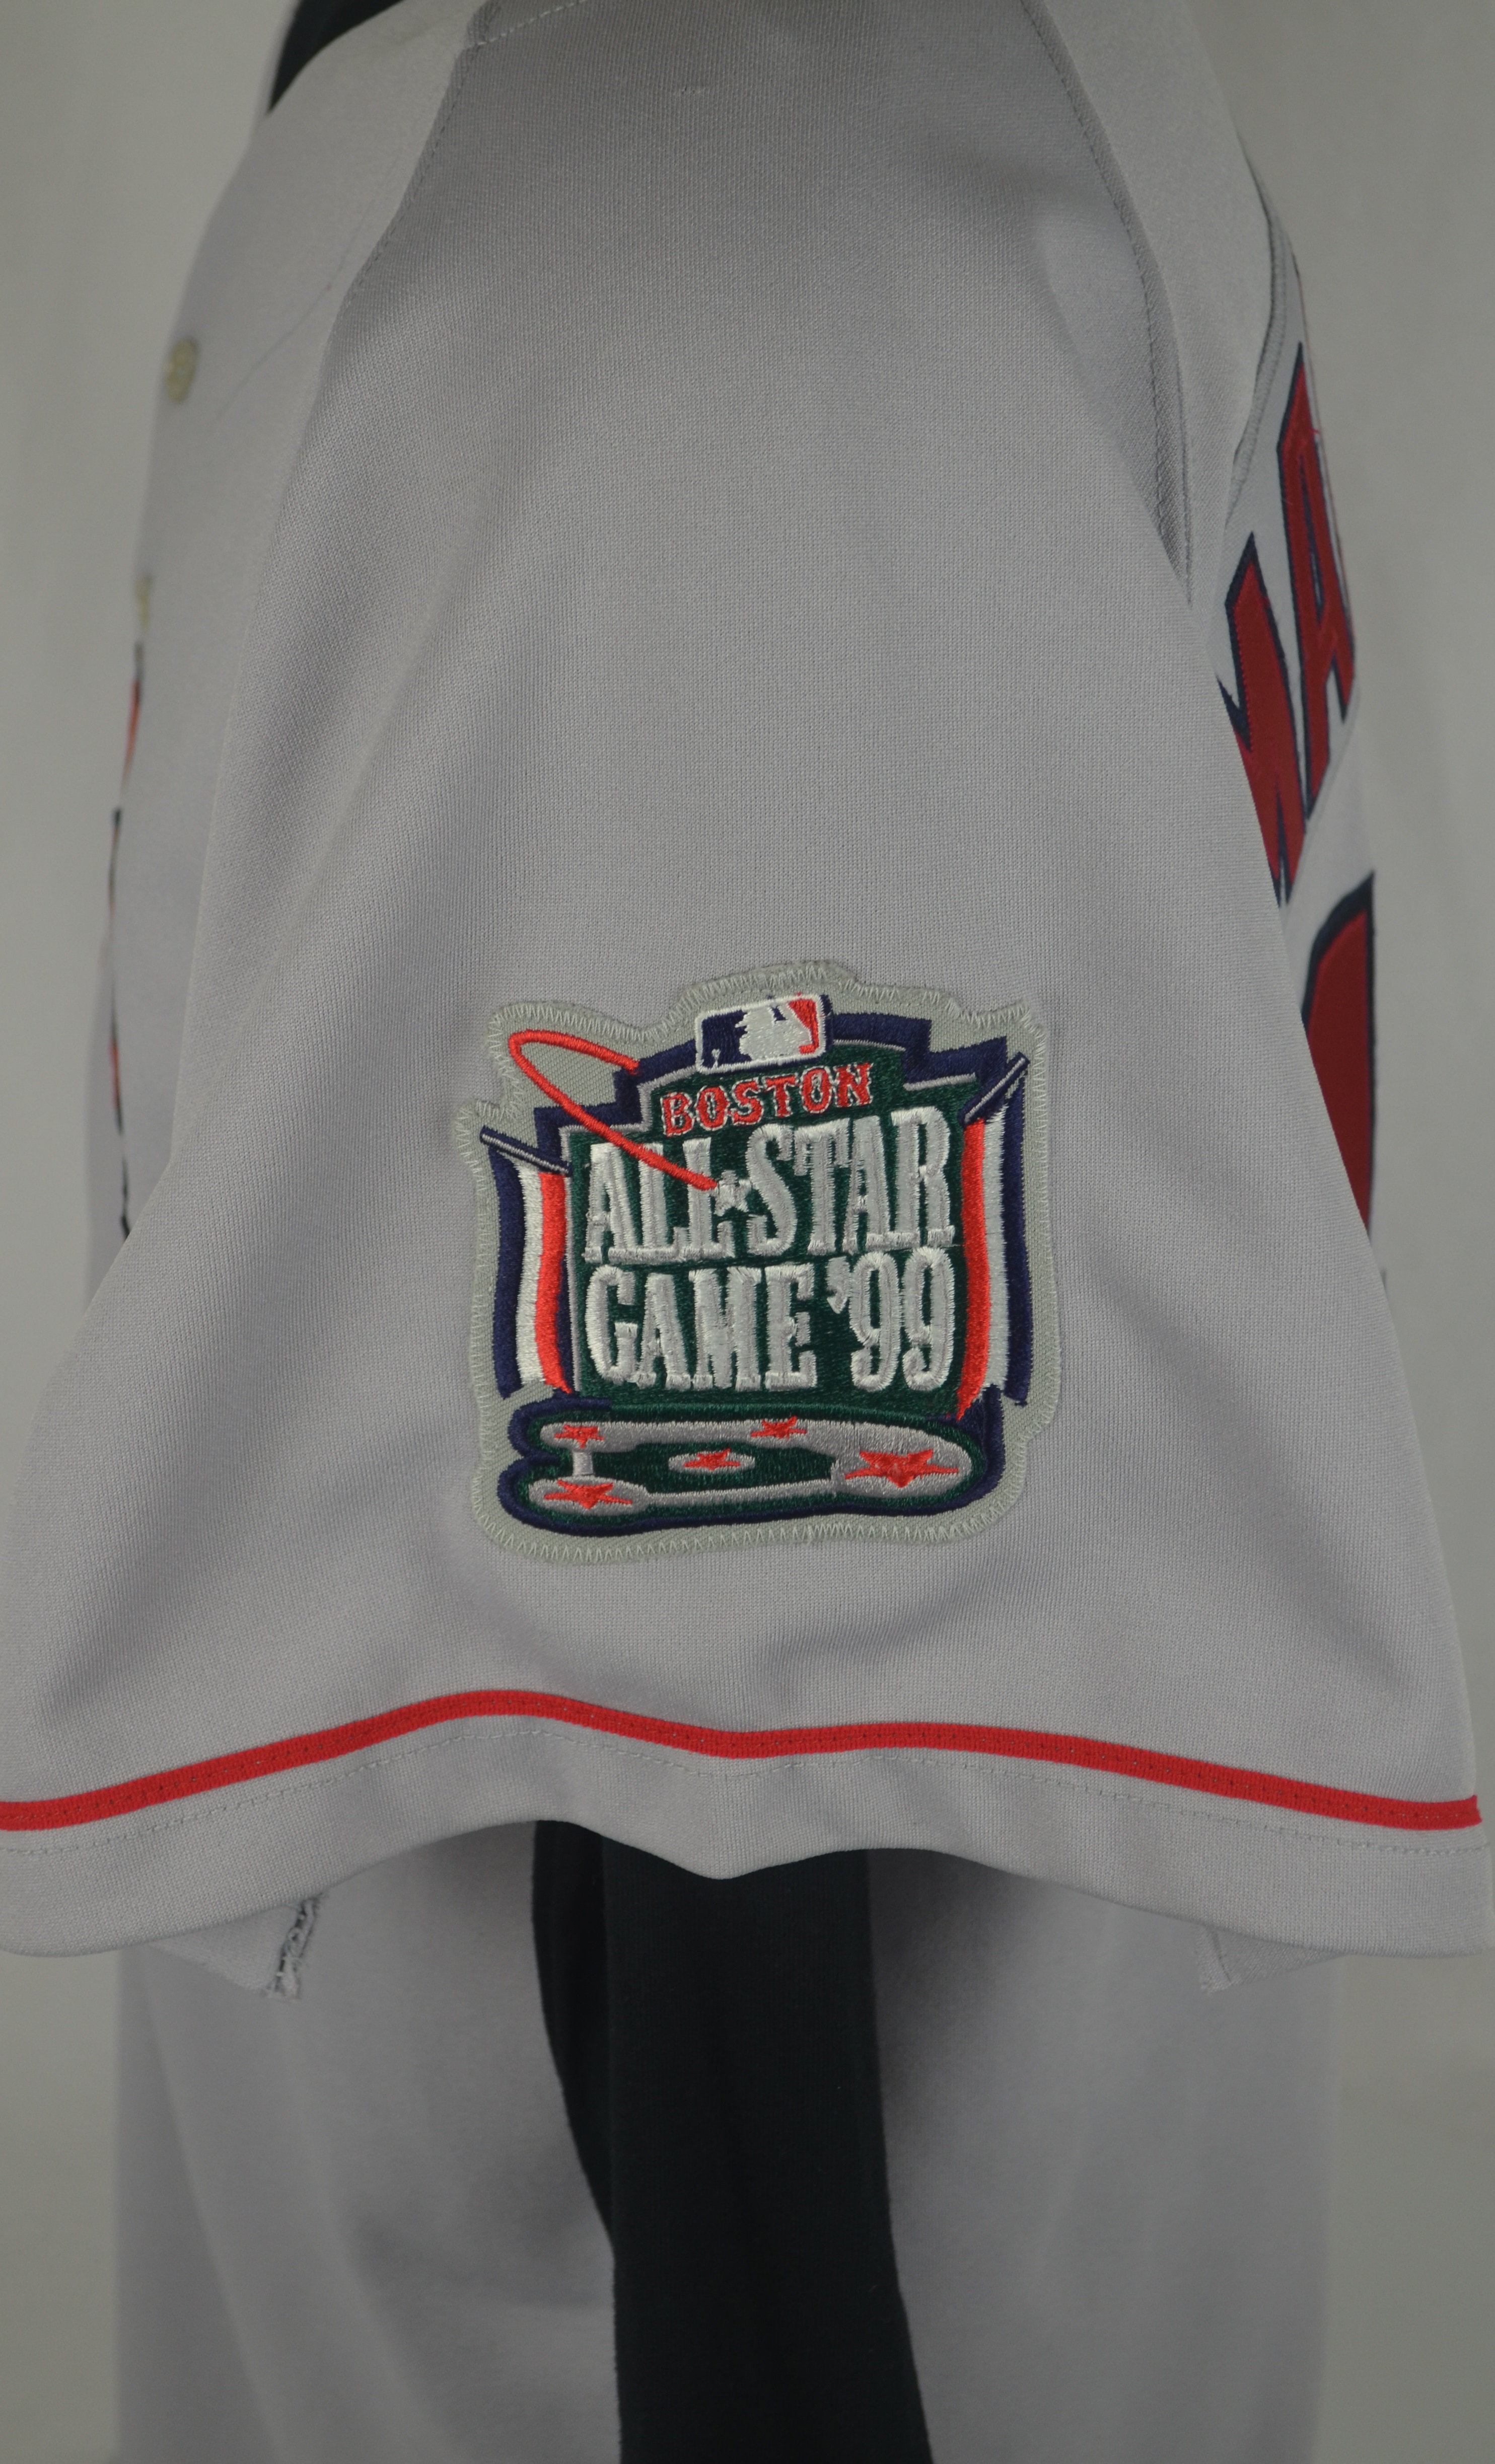 1999 all star game jersey